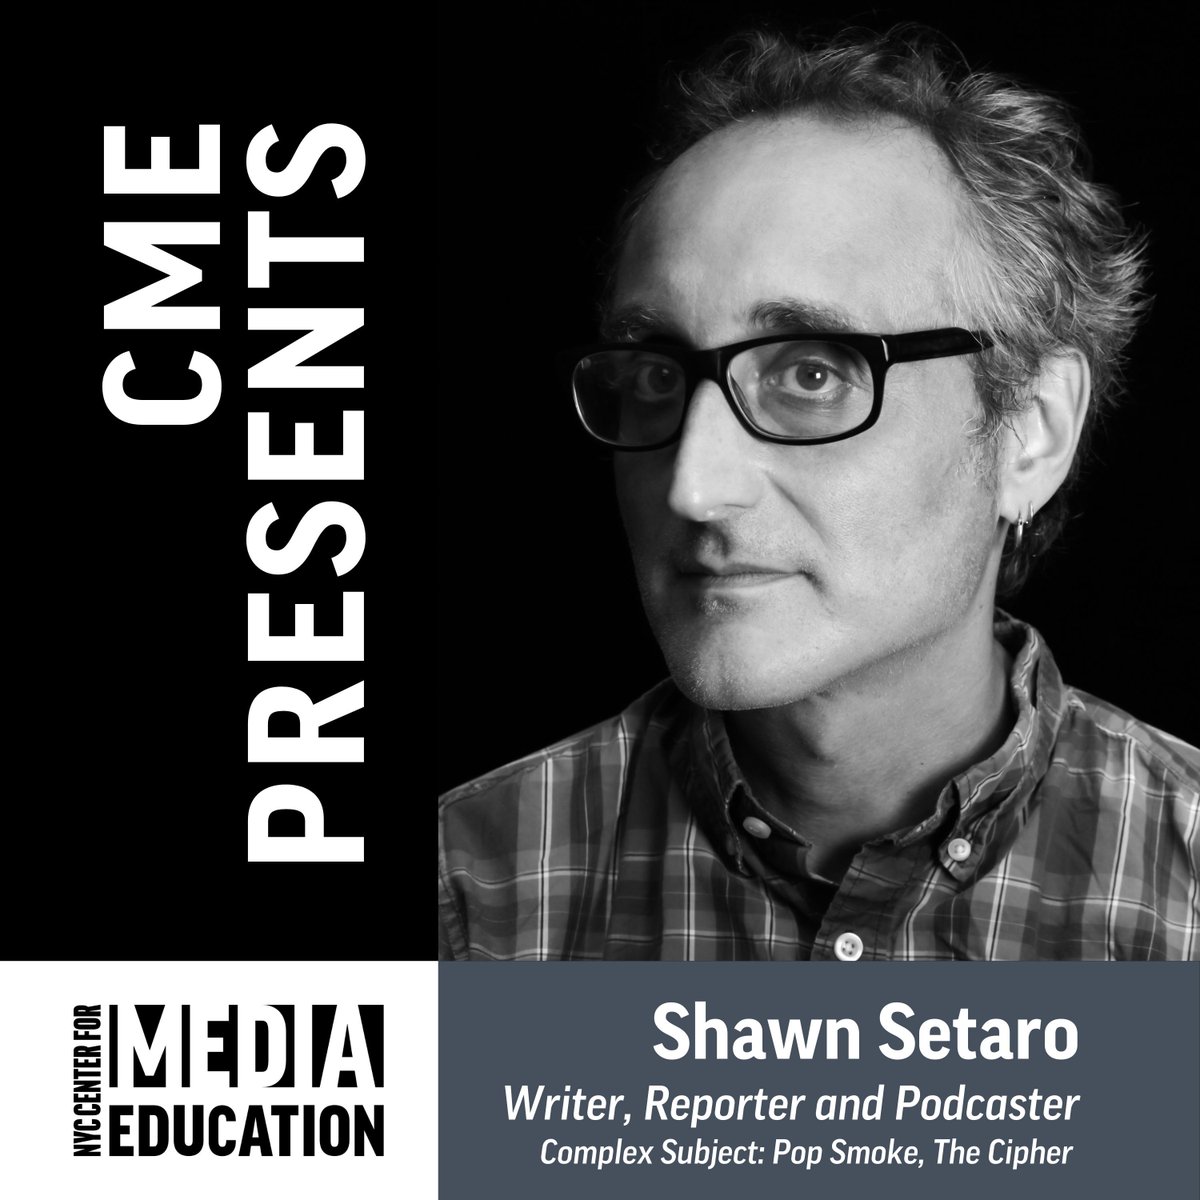 Dive into #MusicJournalism with @SameOldShawn! Listen as Shawn dissects his approach to writing, reporting & #interviewing artists for captivating #podcasts like '@Complex Subject: Pop Smoke', 'Infamous: The Story of YNW Melly' & 'Infamous: The Tekashi 6ix9ine Story'.